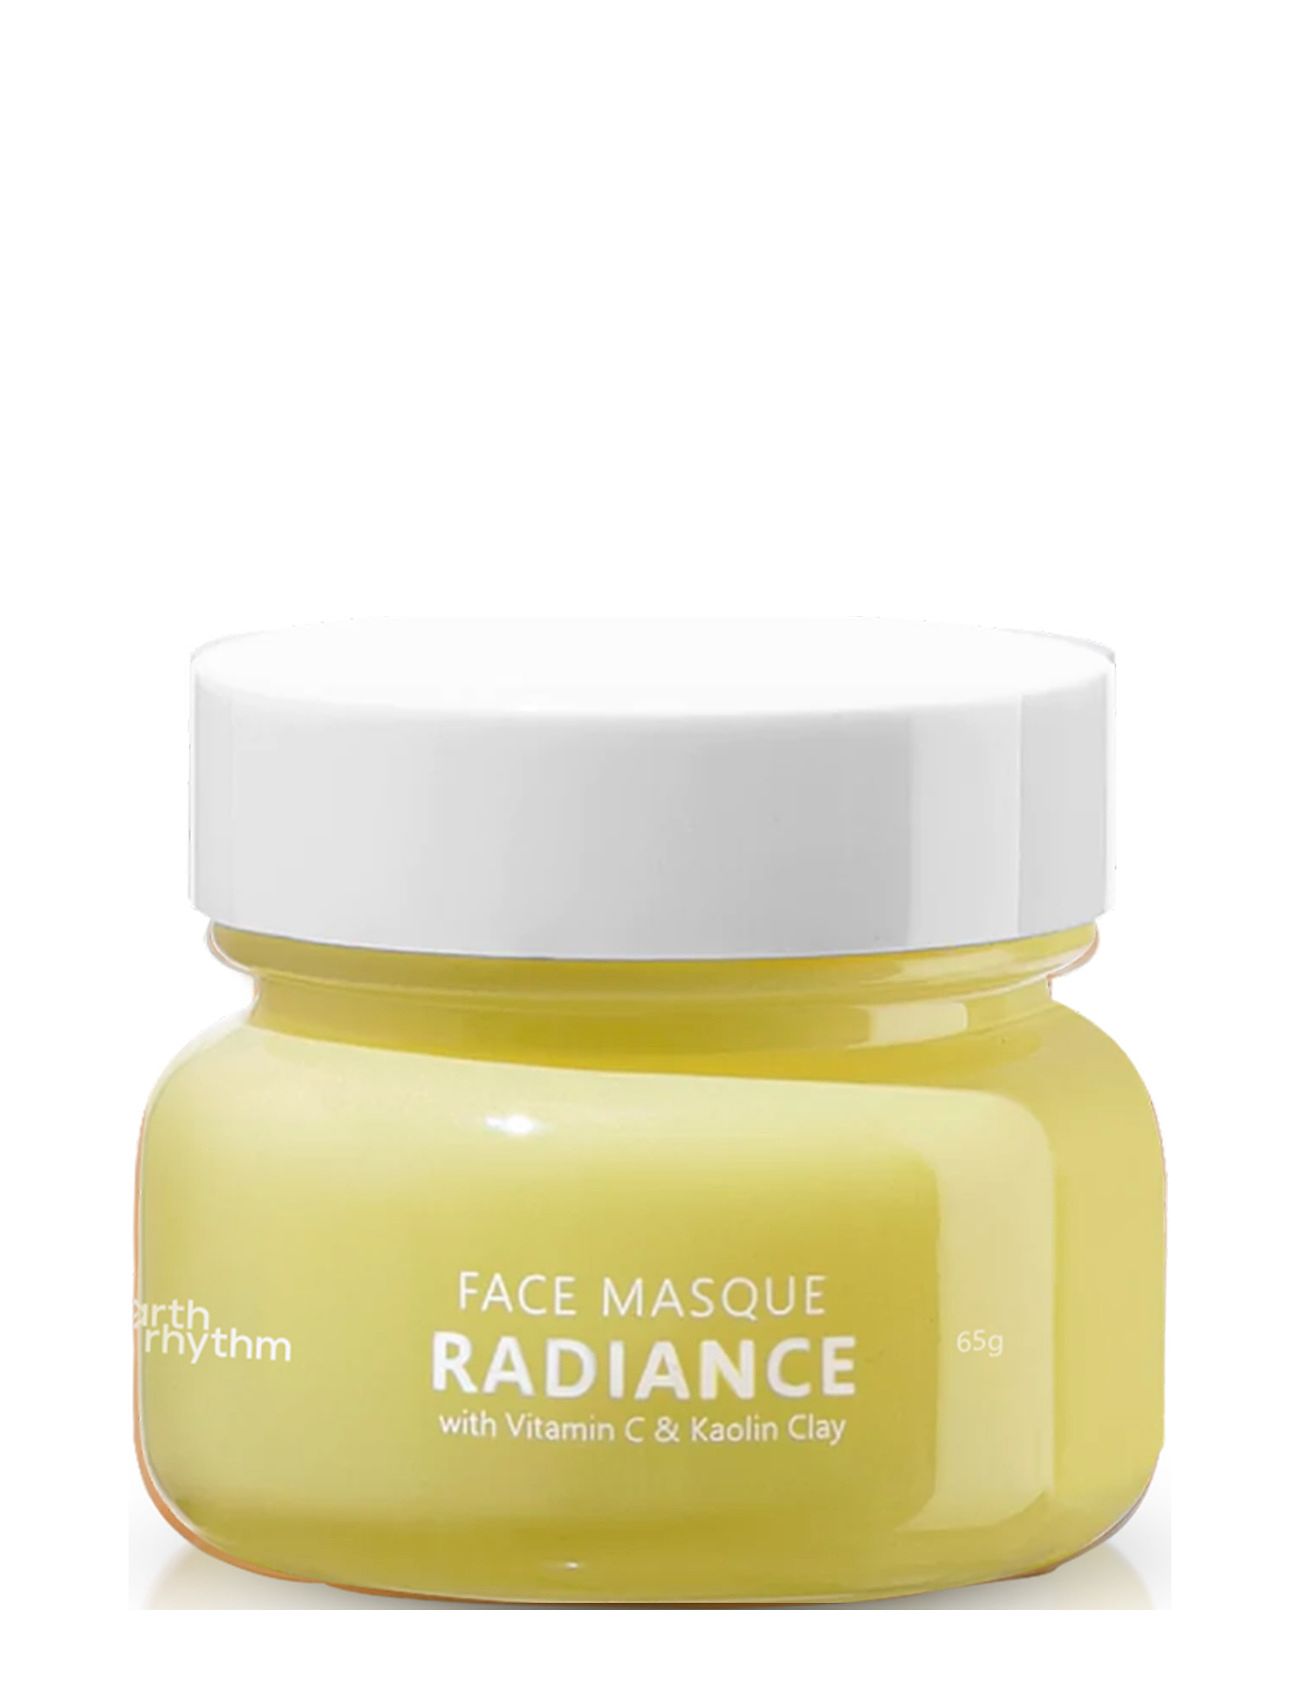 Radiance Face Masque With Vitamin C & Kaolin Clay Beauty Women Skin Care Face Face Masks Clay Mask Yellow Earth Rhythm